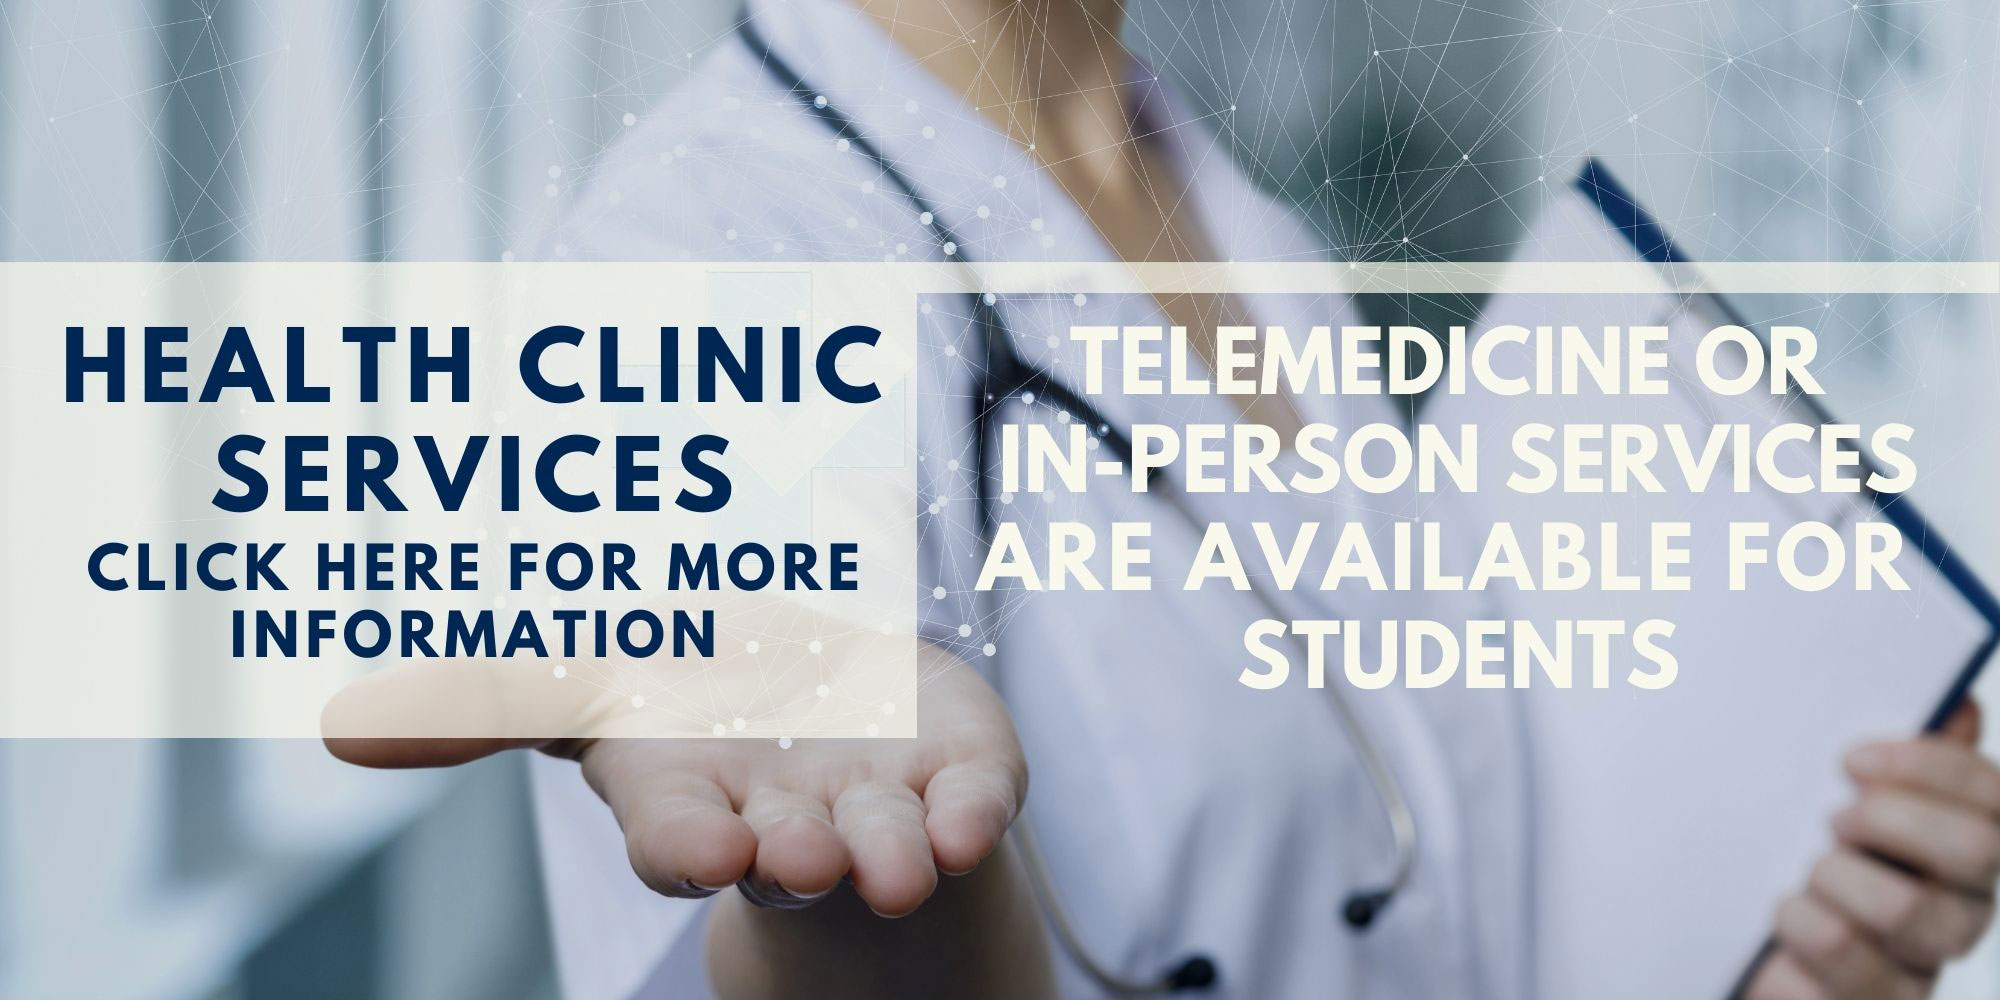 Health Clinic Services. Telemedicine or in-person services are available for students.